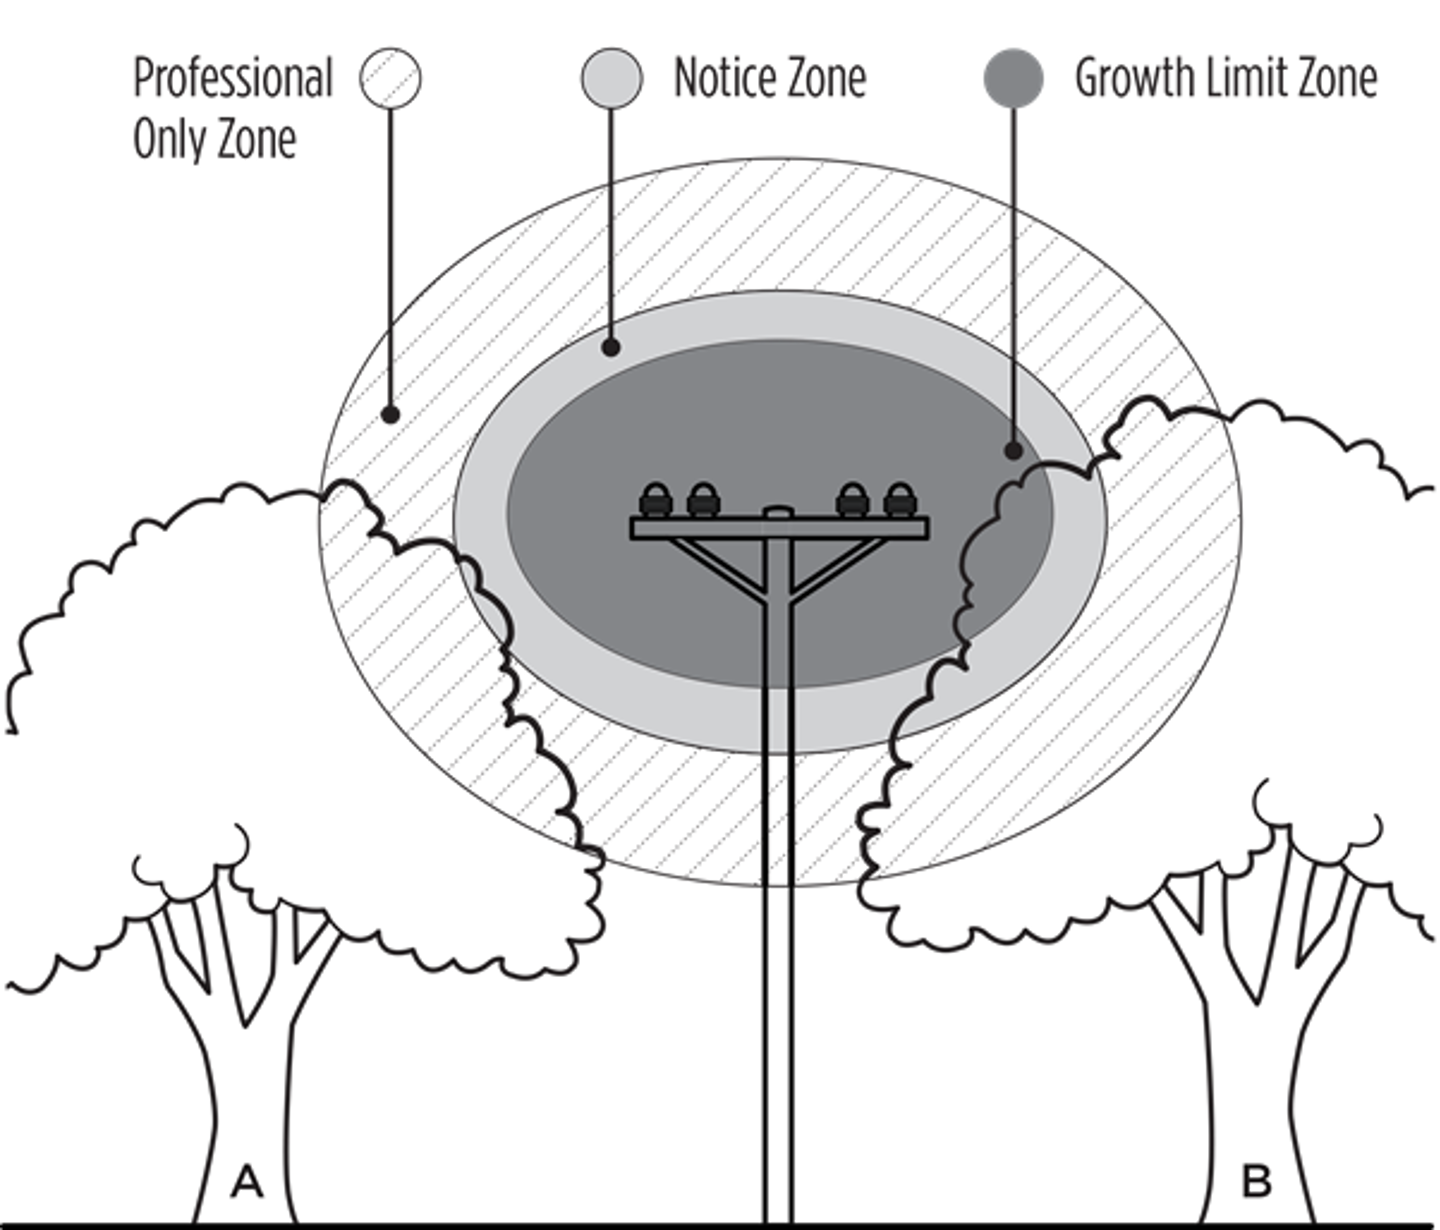 Diagram showing the growth limit zones for trees growing near power lines and power poles. There is the outer ring which from that point inward, is a professional arborist only zone, the middle ring is when you'll receive a notice from us and the inner circle is the growth limit zone.